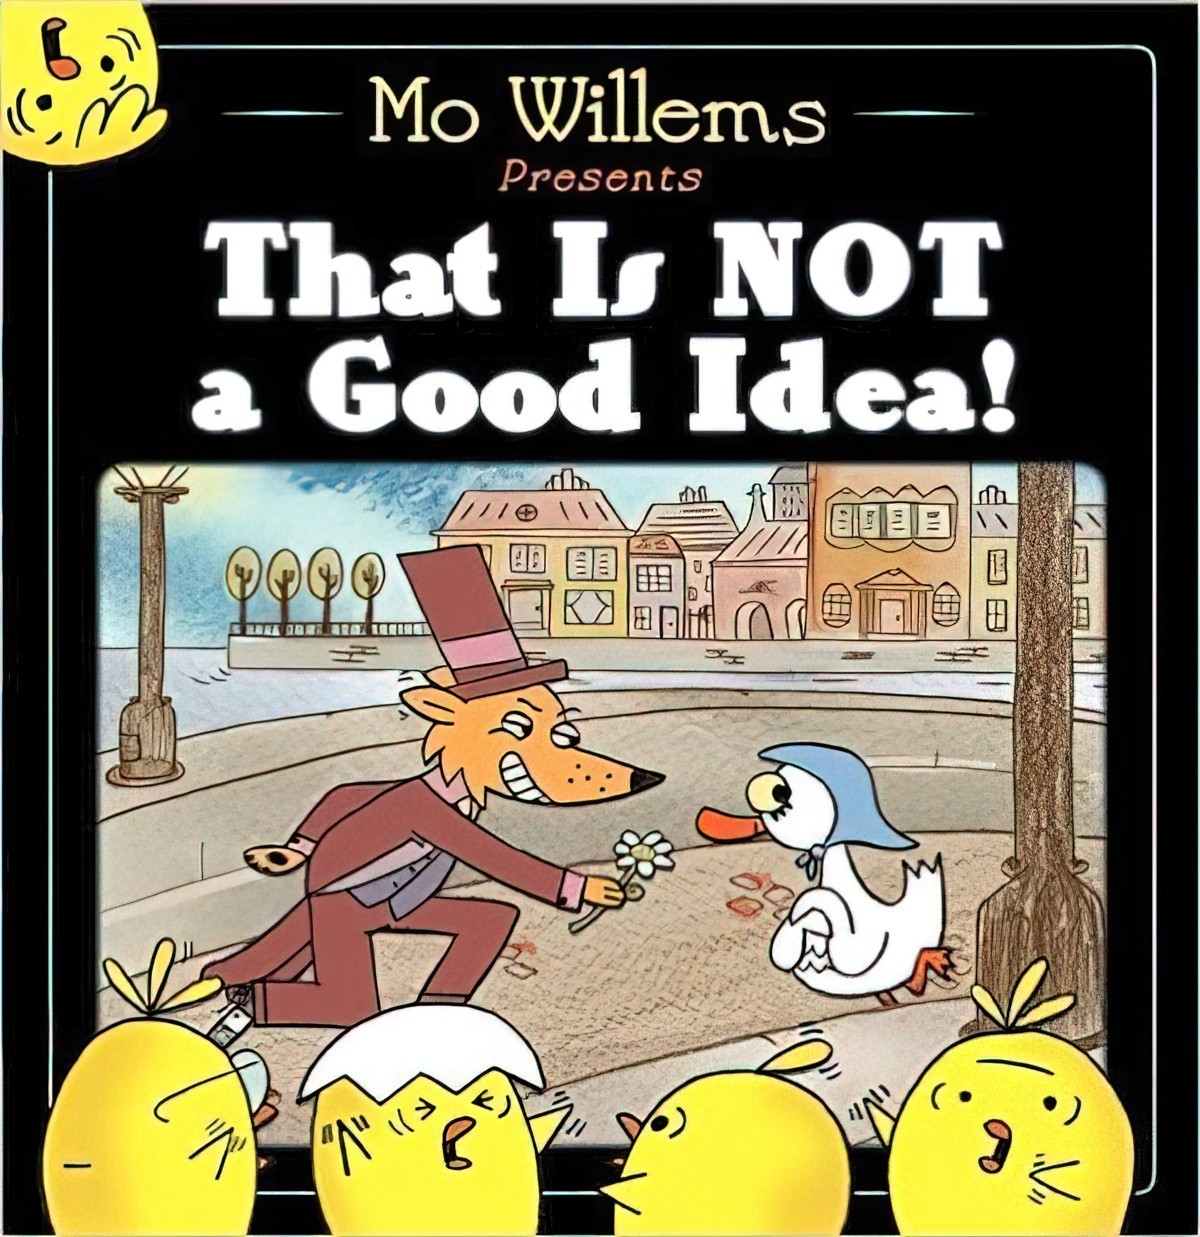 That Is NOT A Good Idea by Mo Willems Analysis